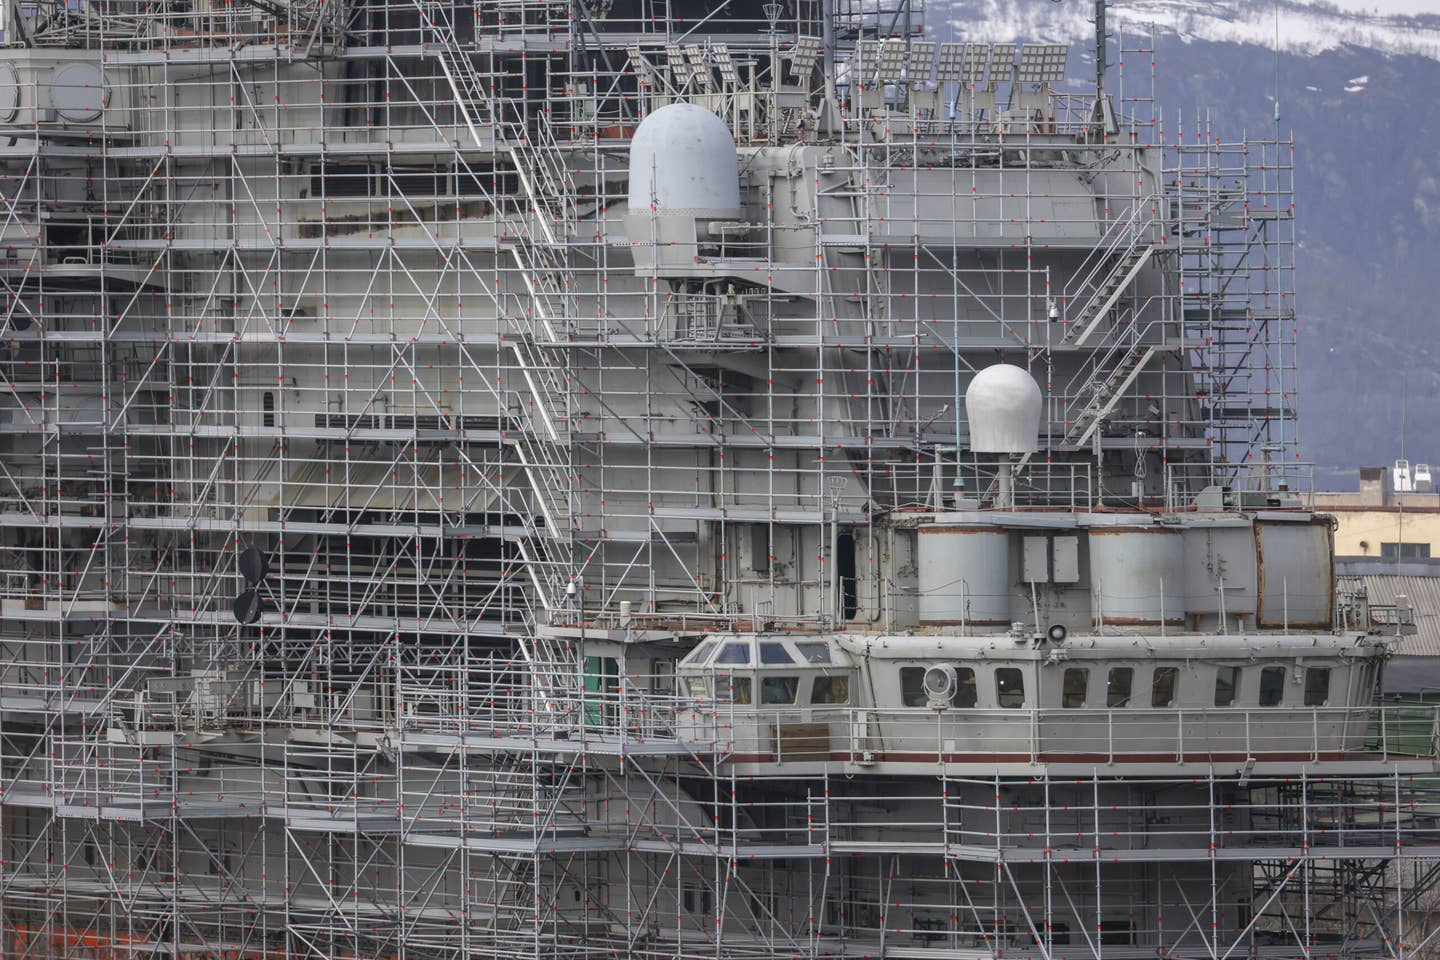 The superstructure of <em>Admiral Kuznetsov</em> as it appeared while under repair at Murmansk, Russia on May 20, 2022. <em>Semen Vasileyev/Anadolu Agency via Getty Images</em>